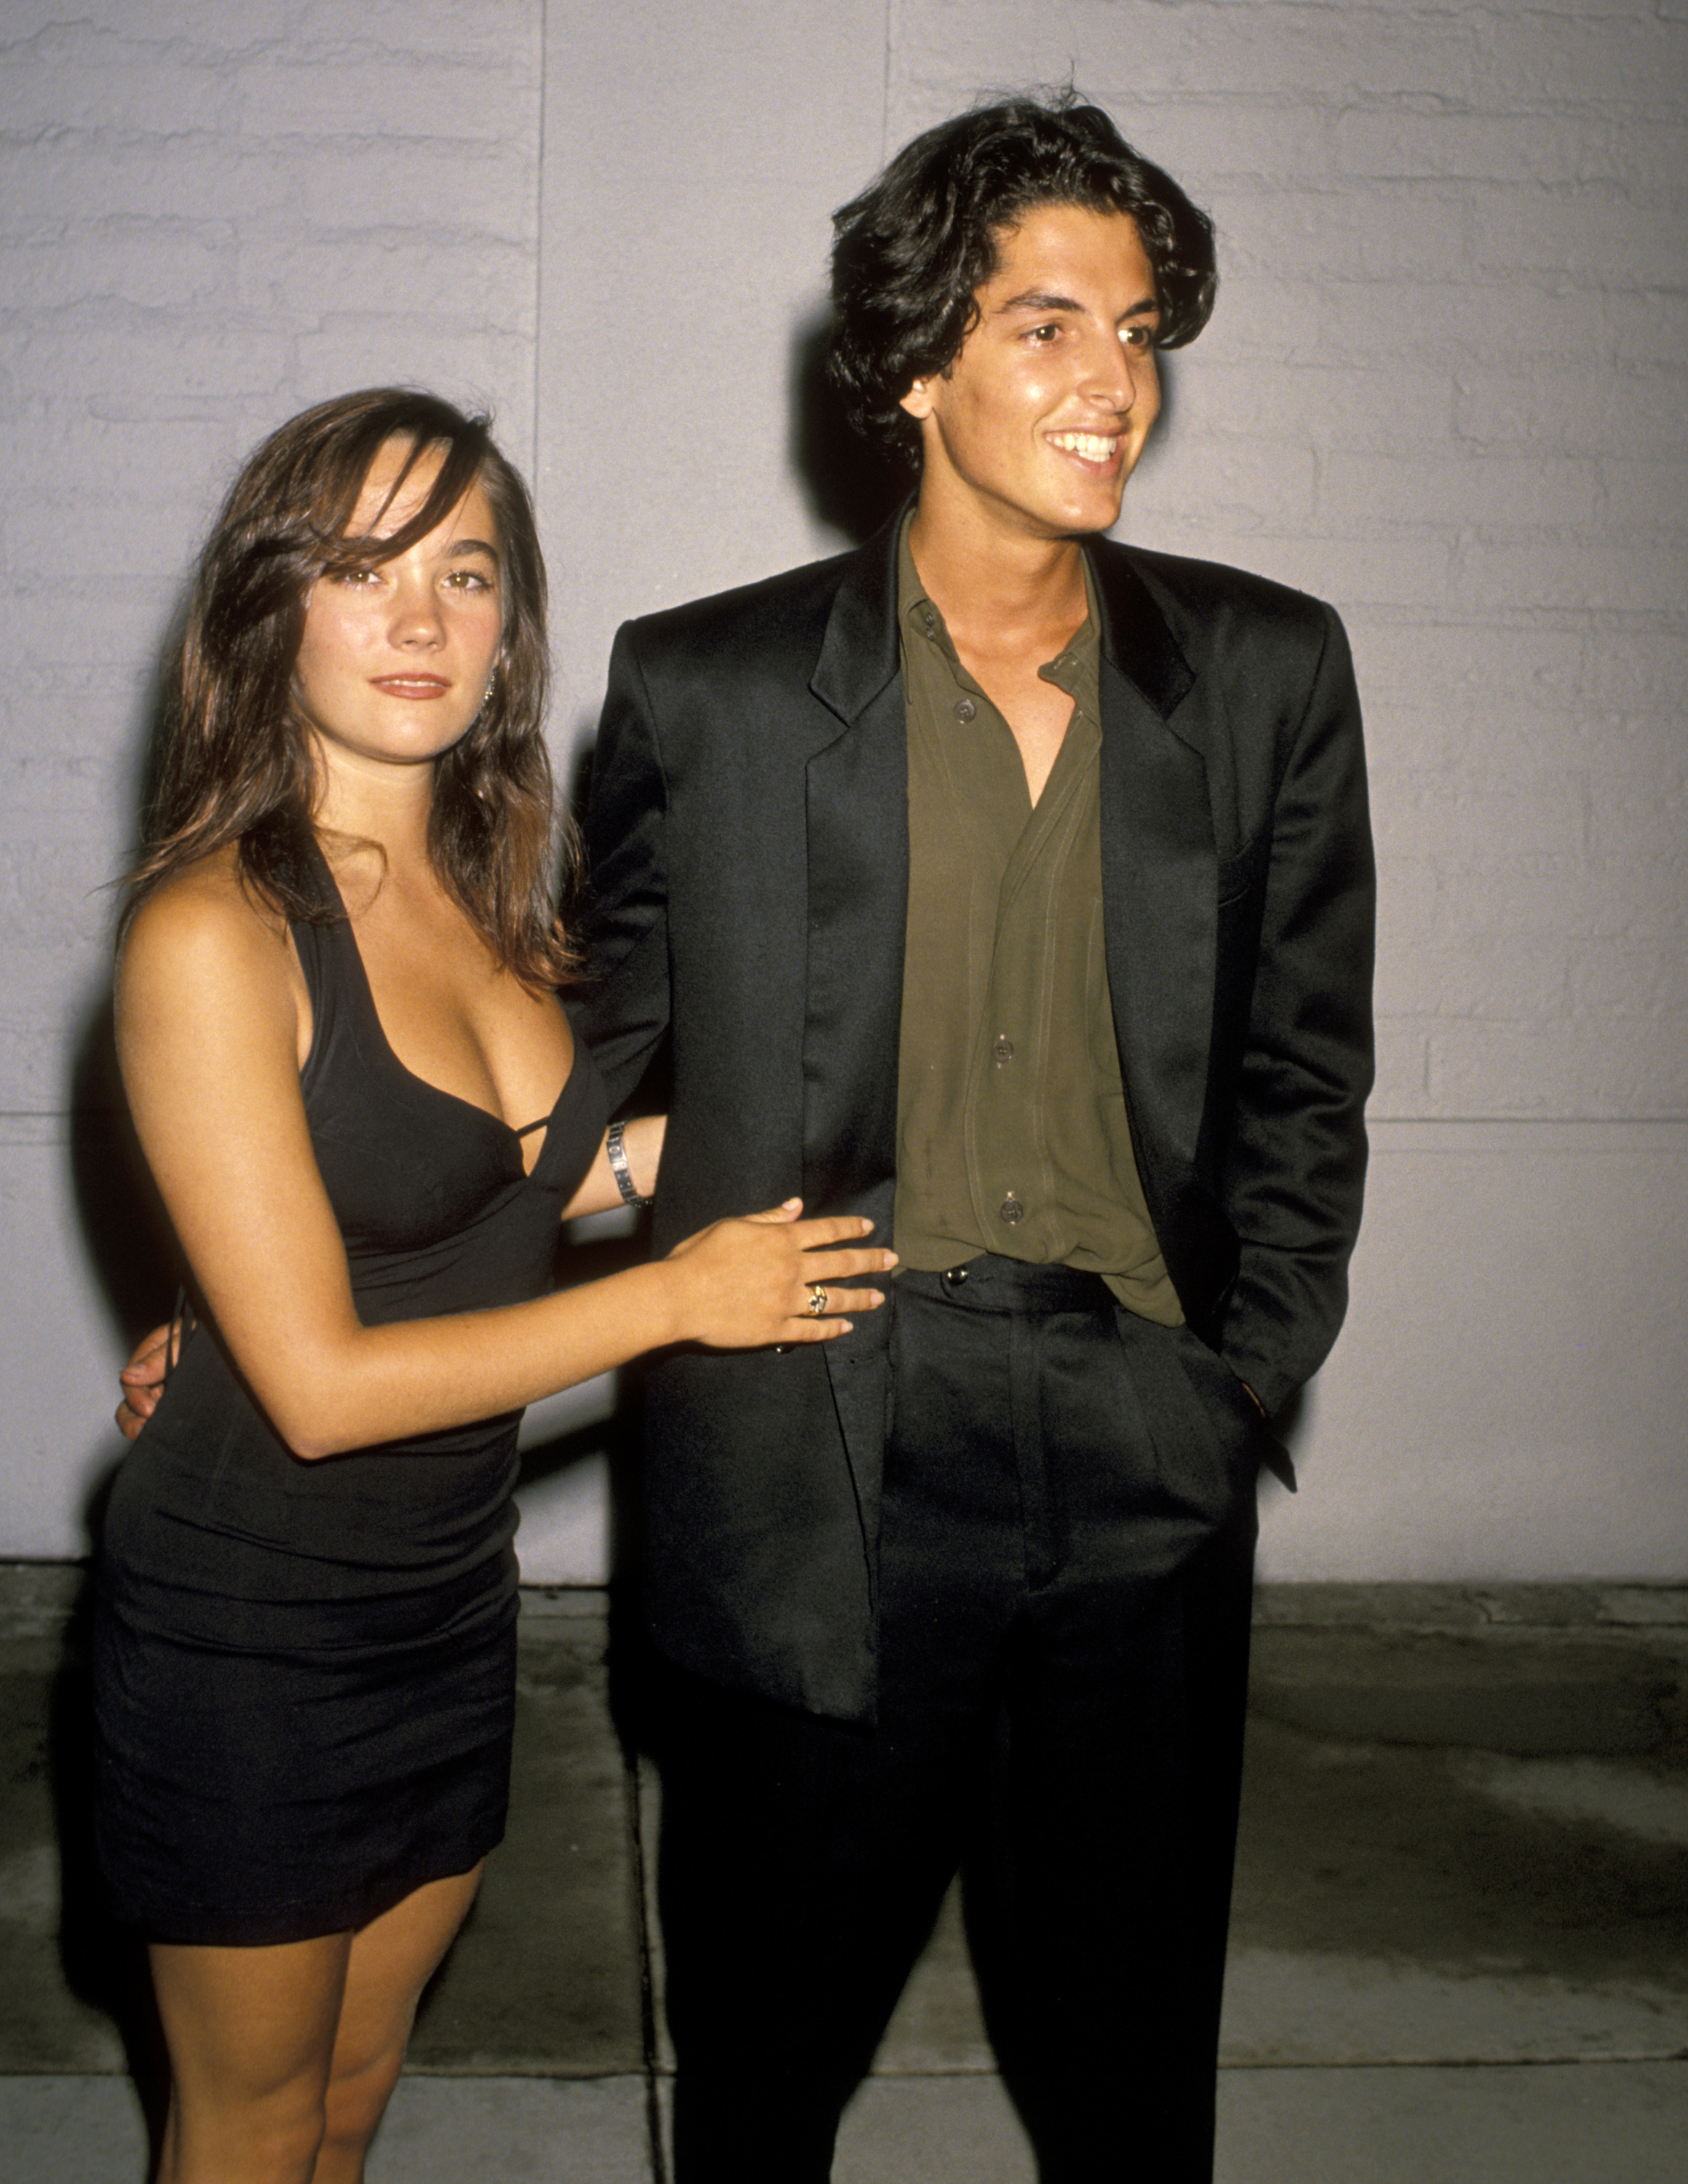 Natasha Gregson Wagner and Josh Evans during "The Two Jakes" Los Angeles Premiere - After Party at Chasen's on August 6, 1990 in Beverly Hills, California. | Source: Getty Images